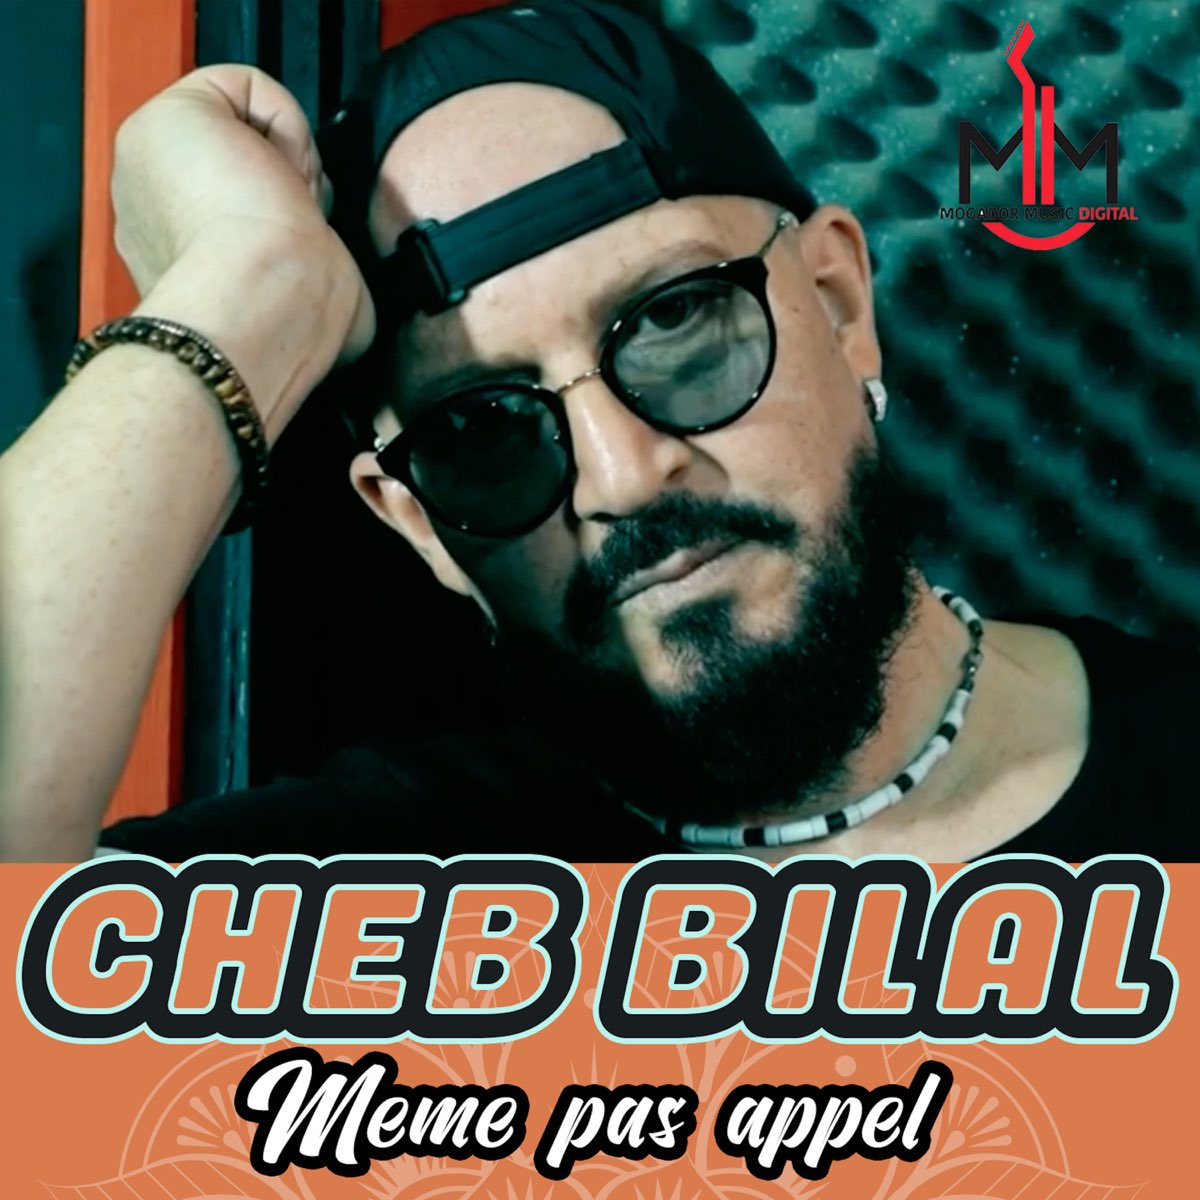 Même pas appel - Single by Cheb Bilal on Apple Music